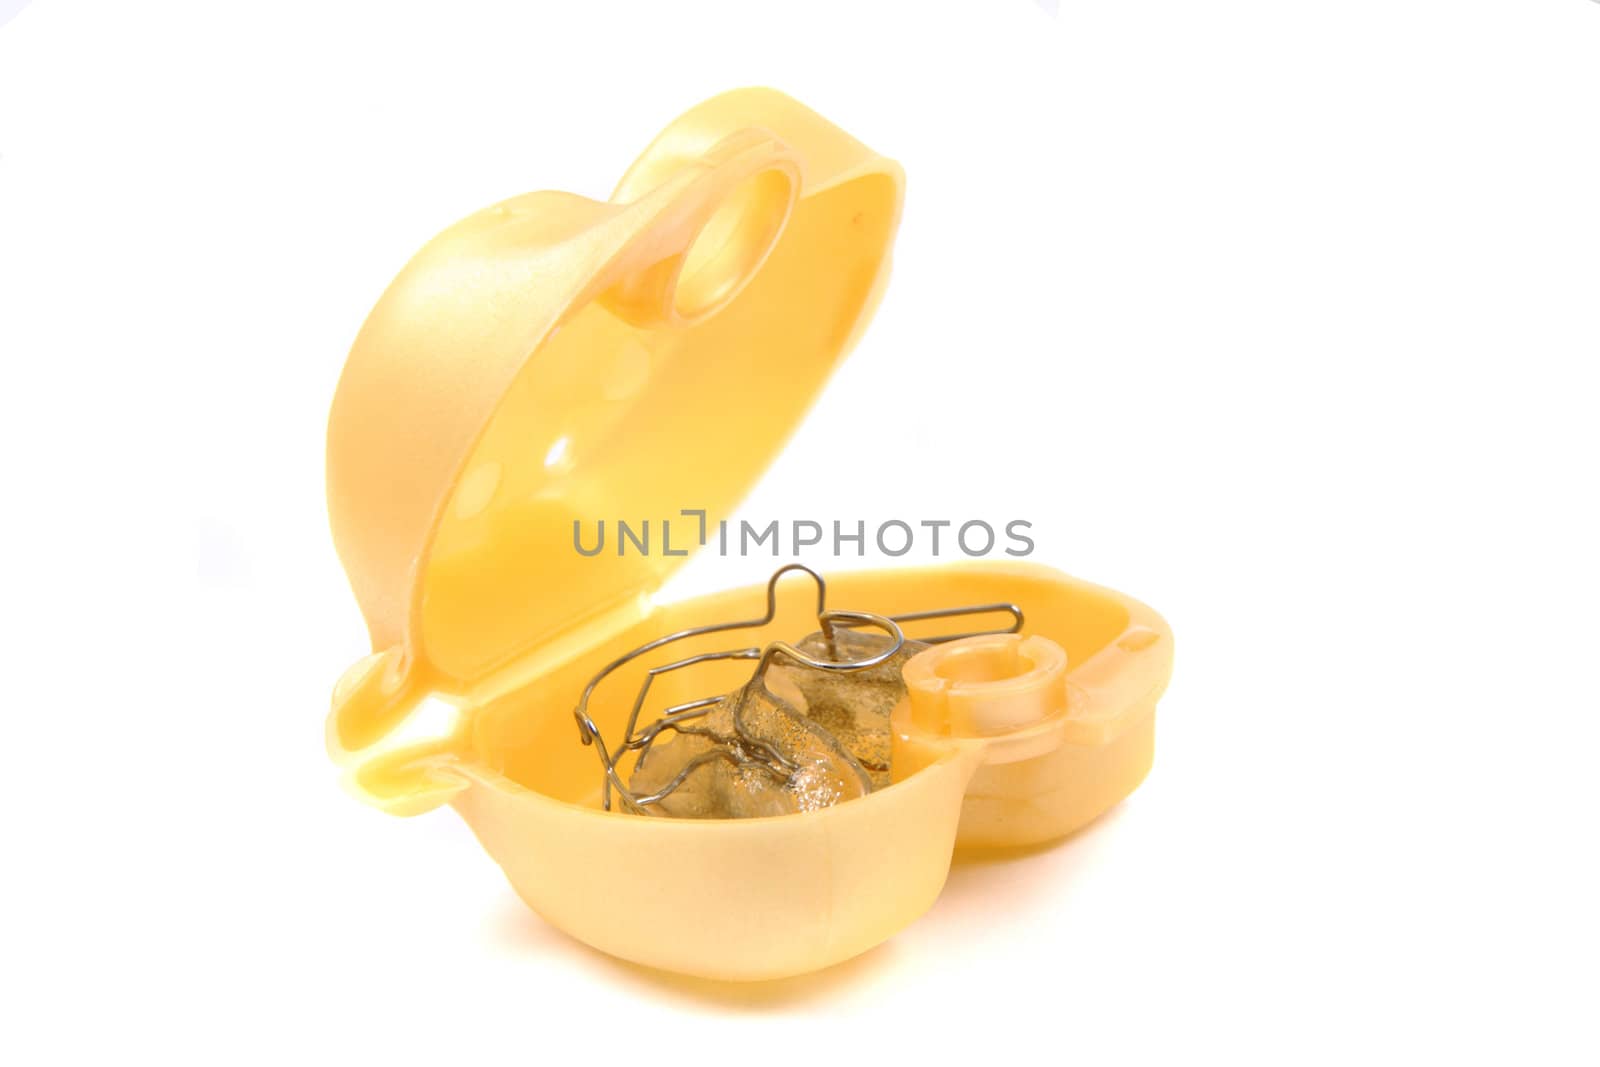 braces in yellow box isolated on the white background